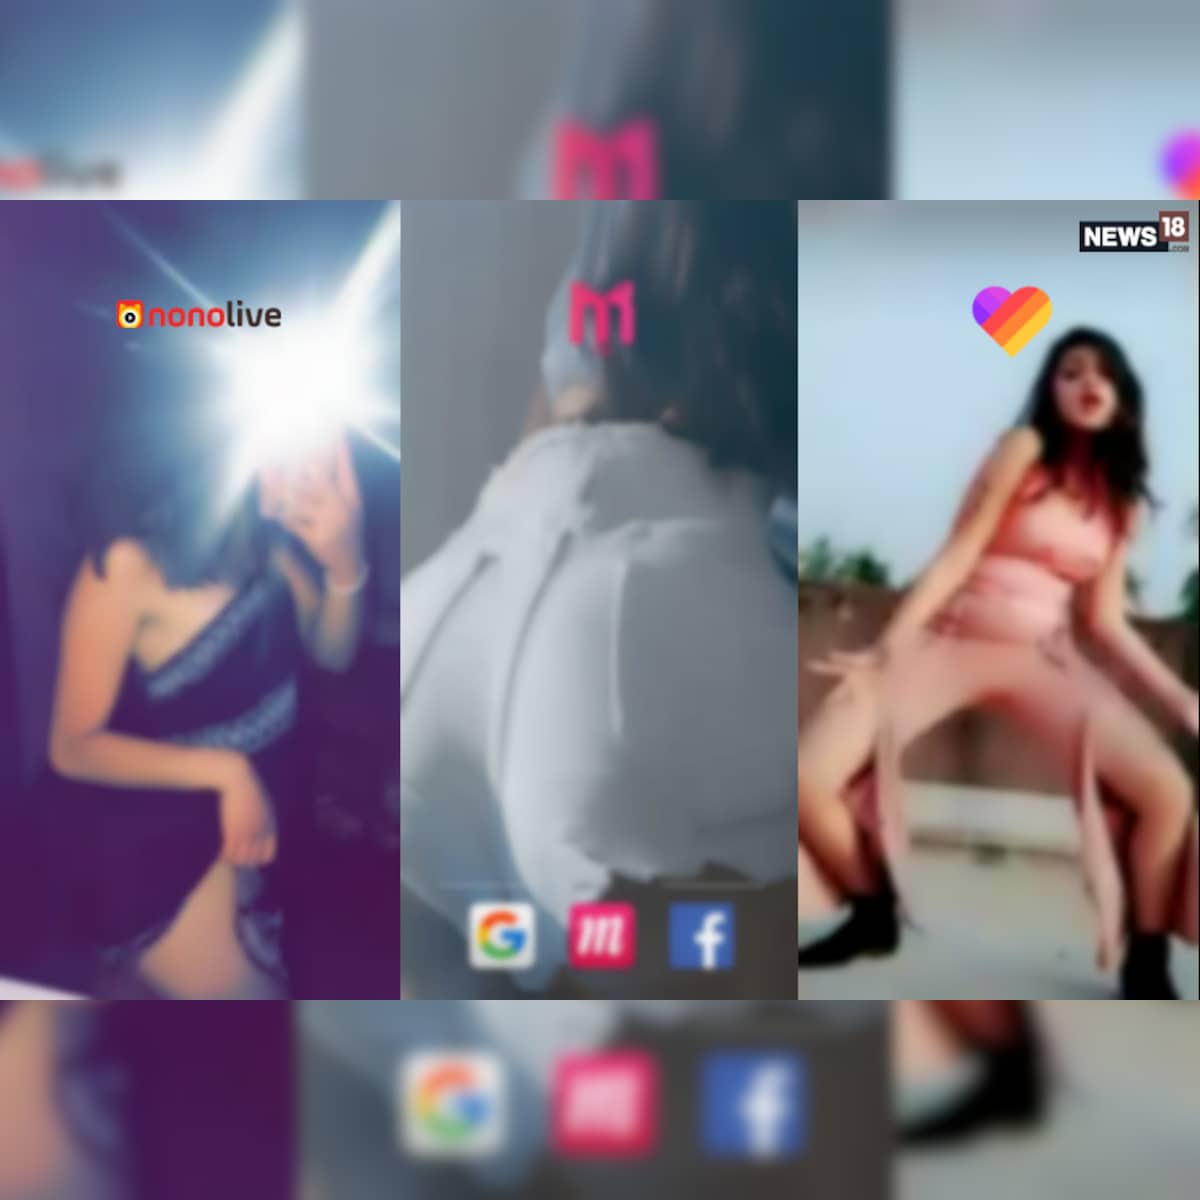 Collage Marthi Sex 18 Year - New Age Social Media Apps, and a Shocking Problem of Borderline Sexual  Content